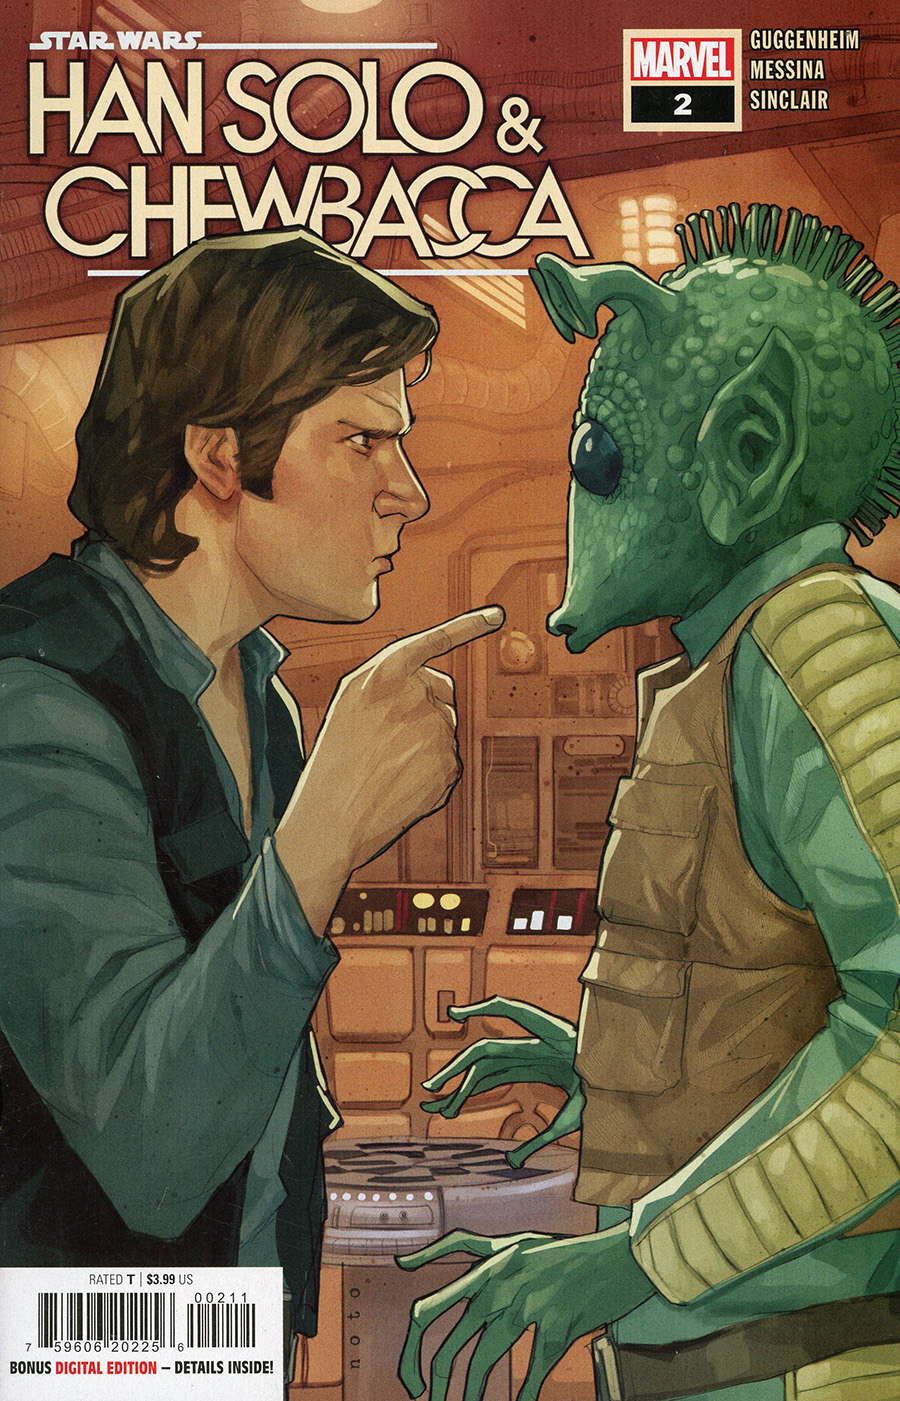 Star Wars Han Solo & Chewbacca #2 Cover A Regular Phil Noto Cover